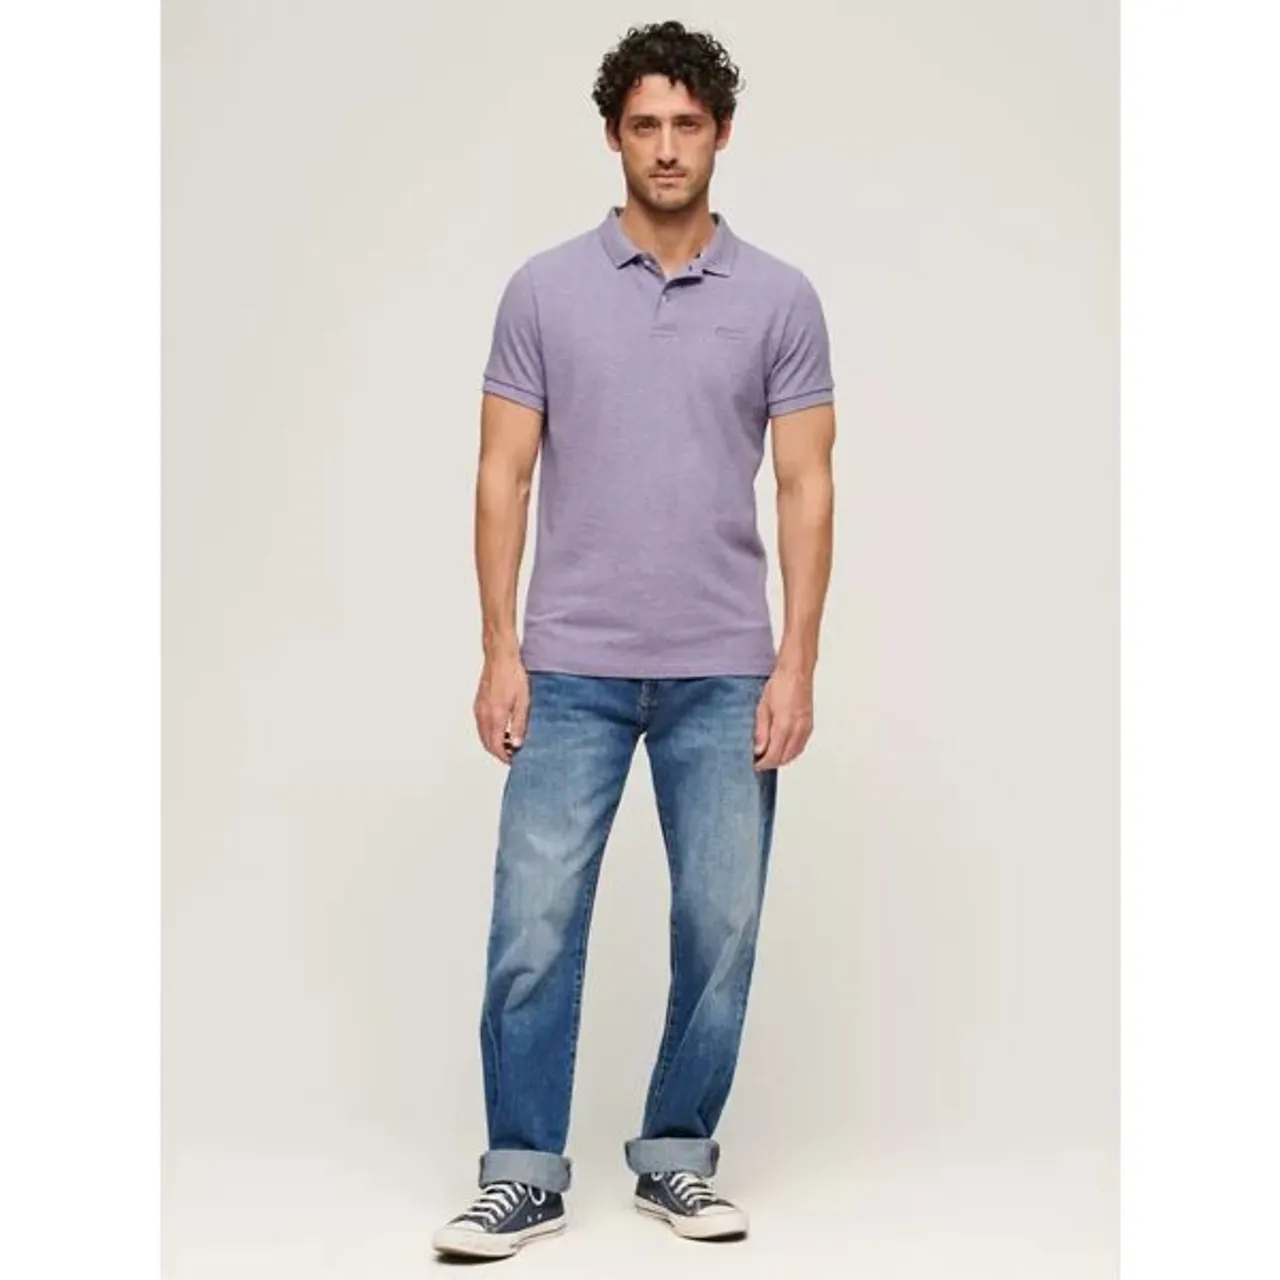 Superdry Classic Pique Polo Shirt - Lilac - Male